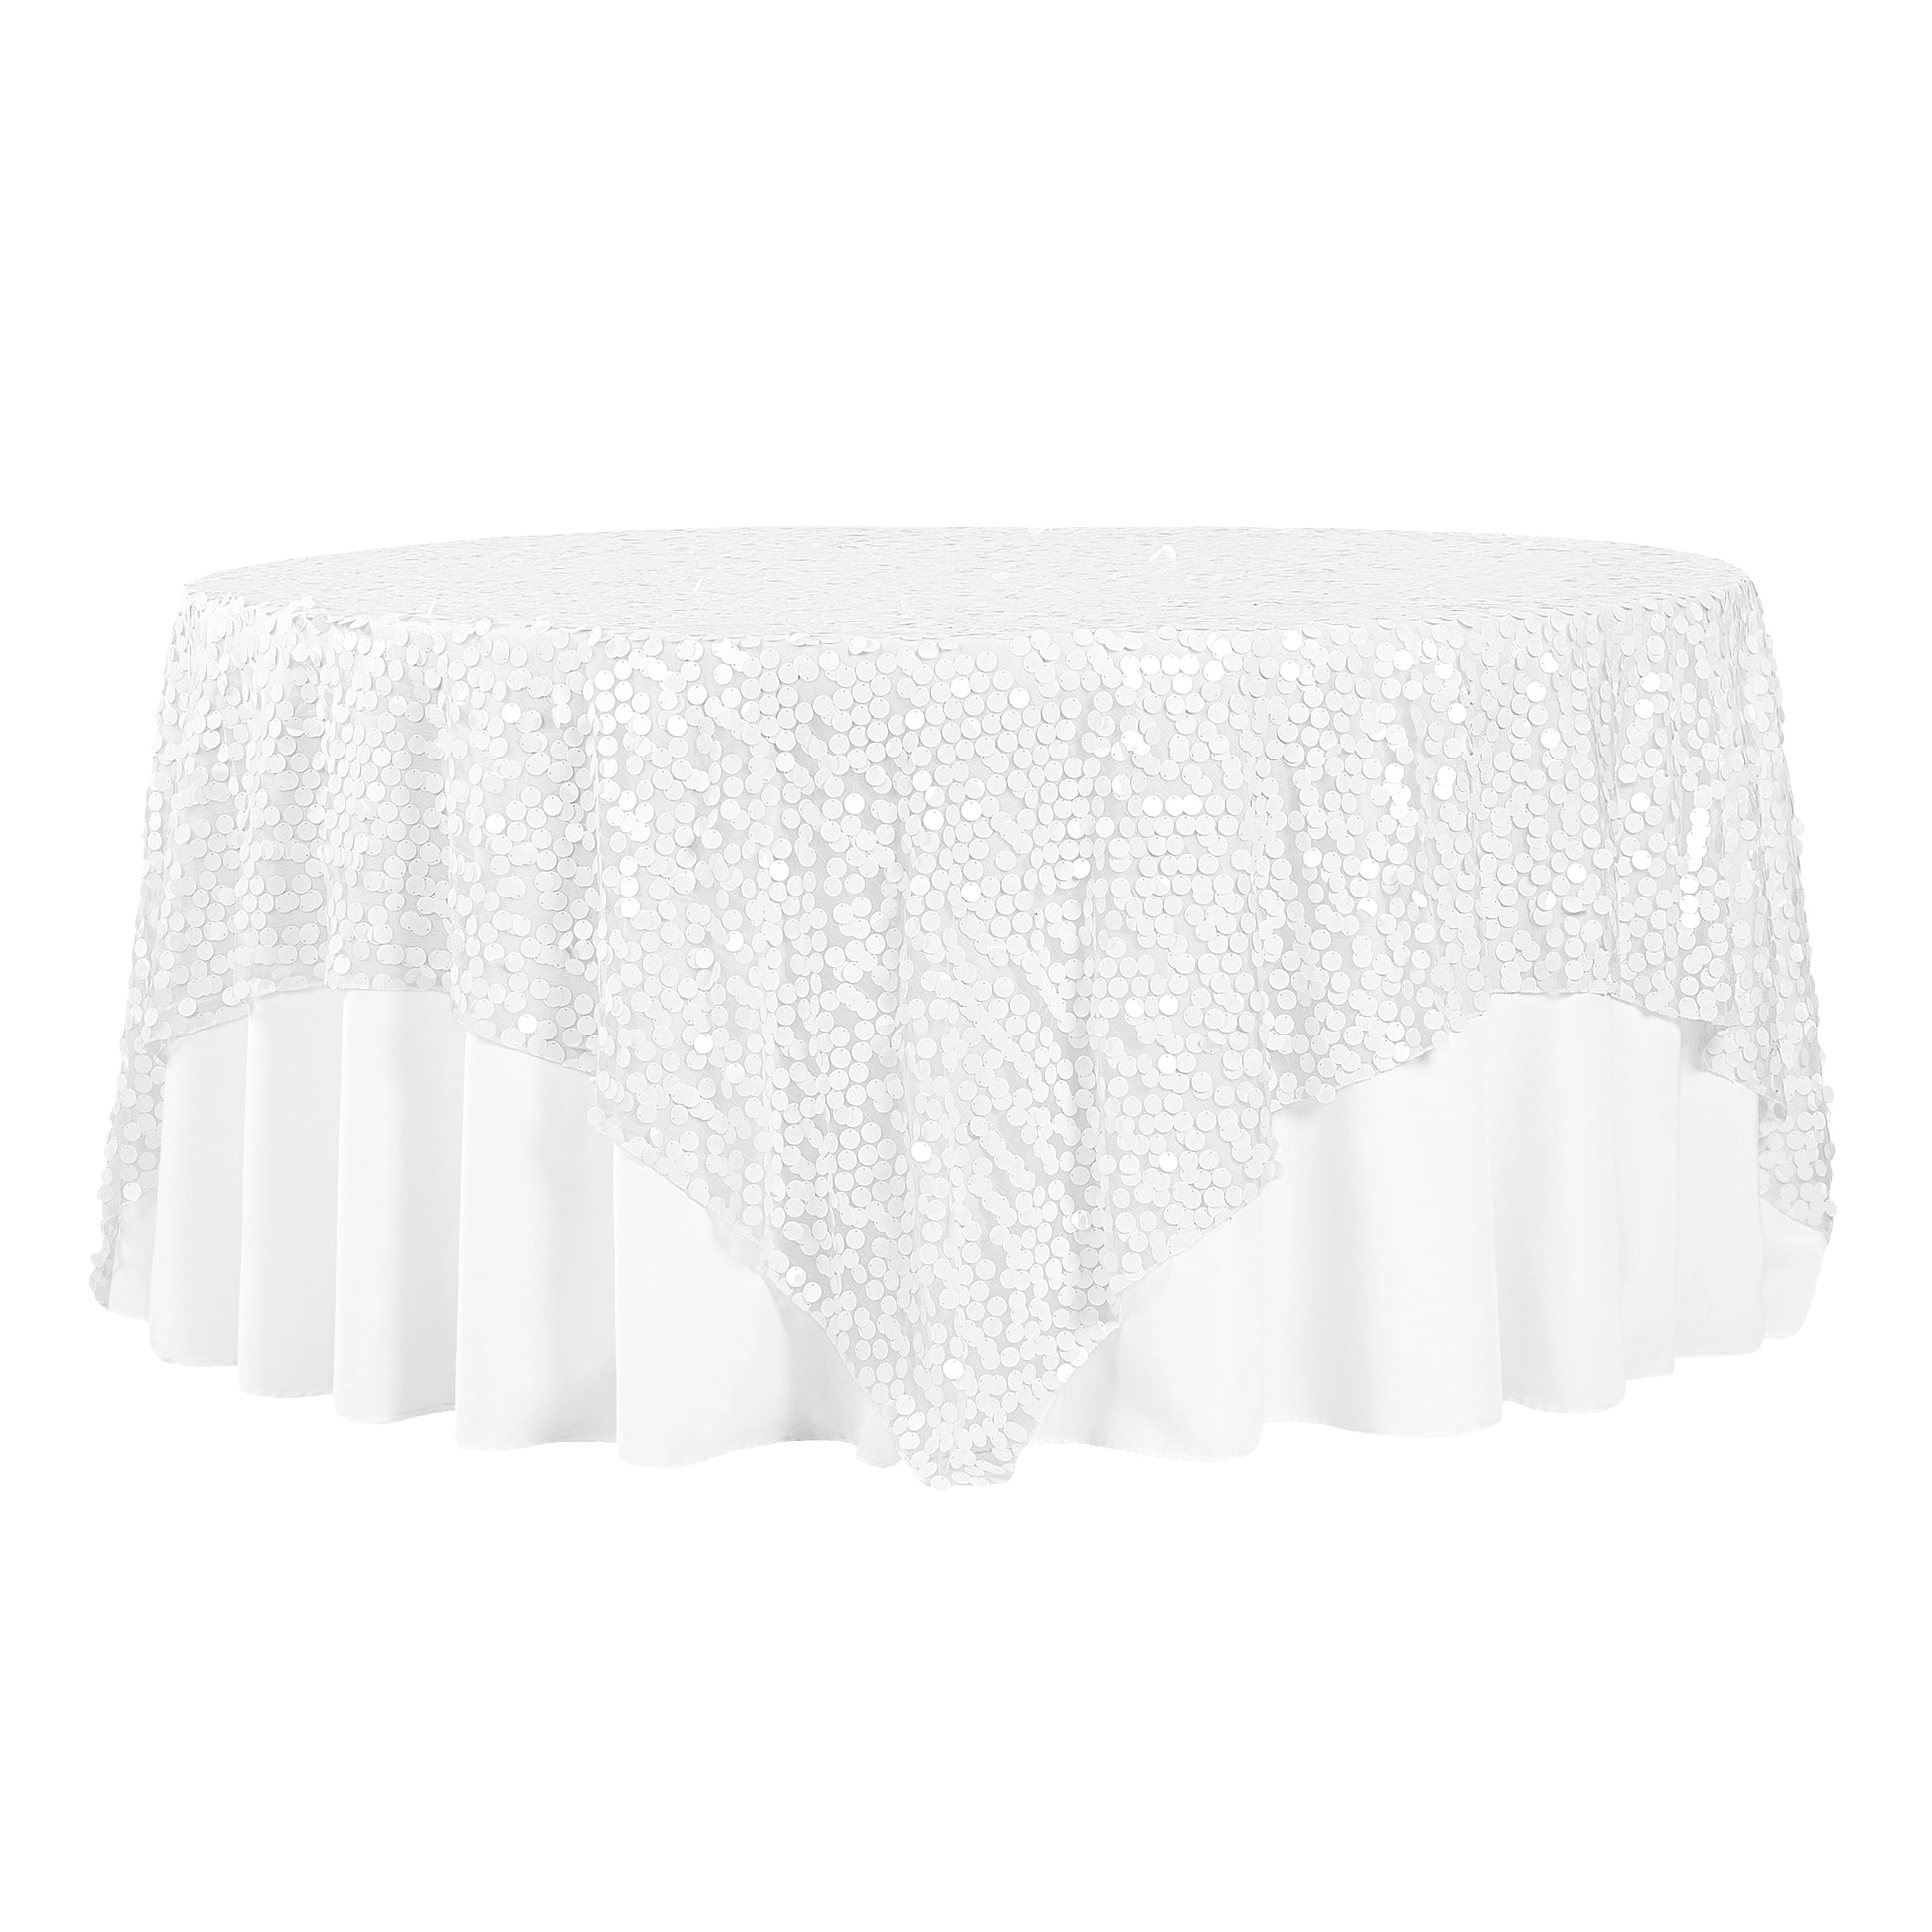 Large Payette Sequin Table Overlay Topper 90"x90" Square - White - CV Linens